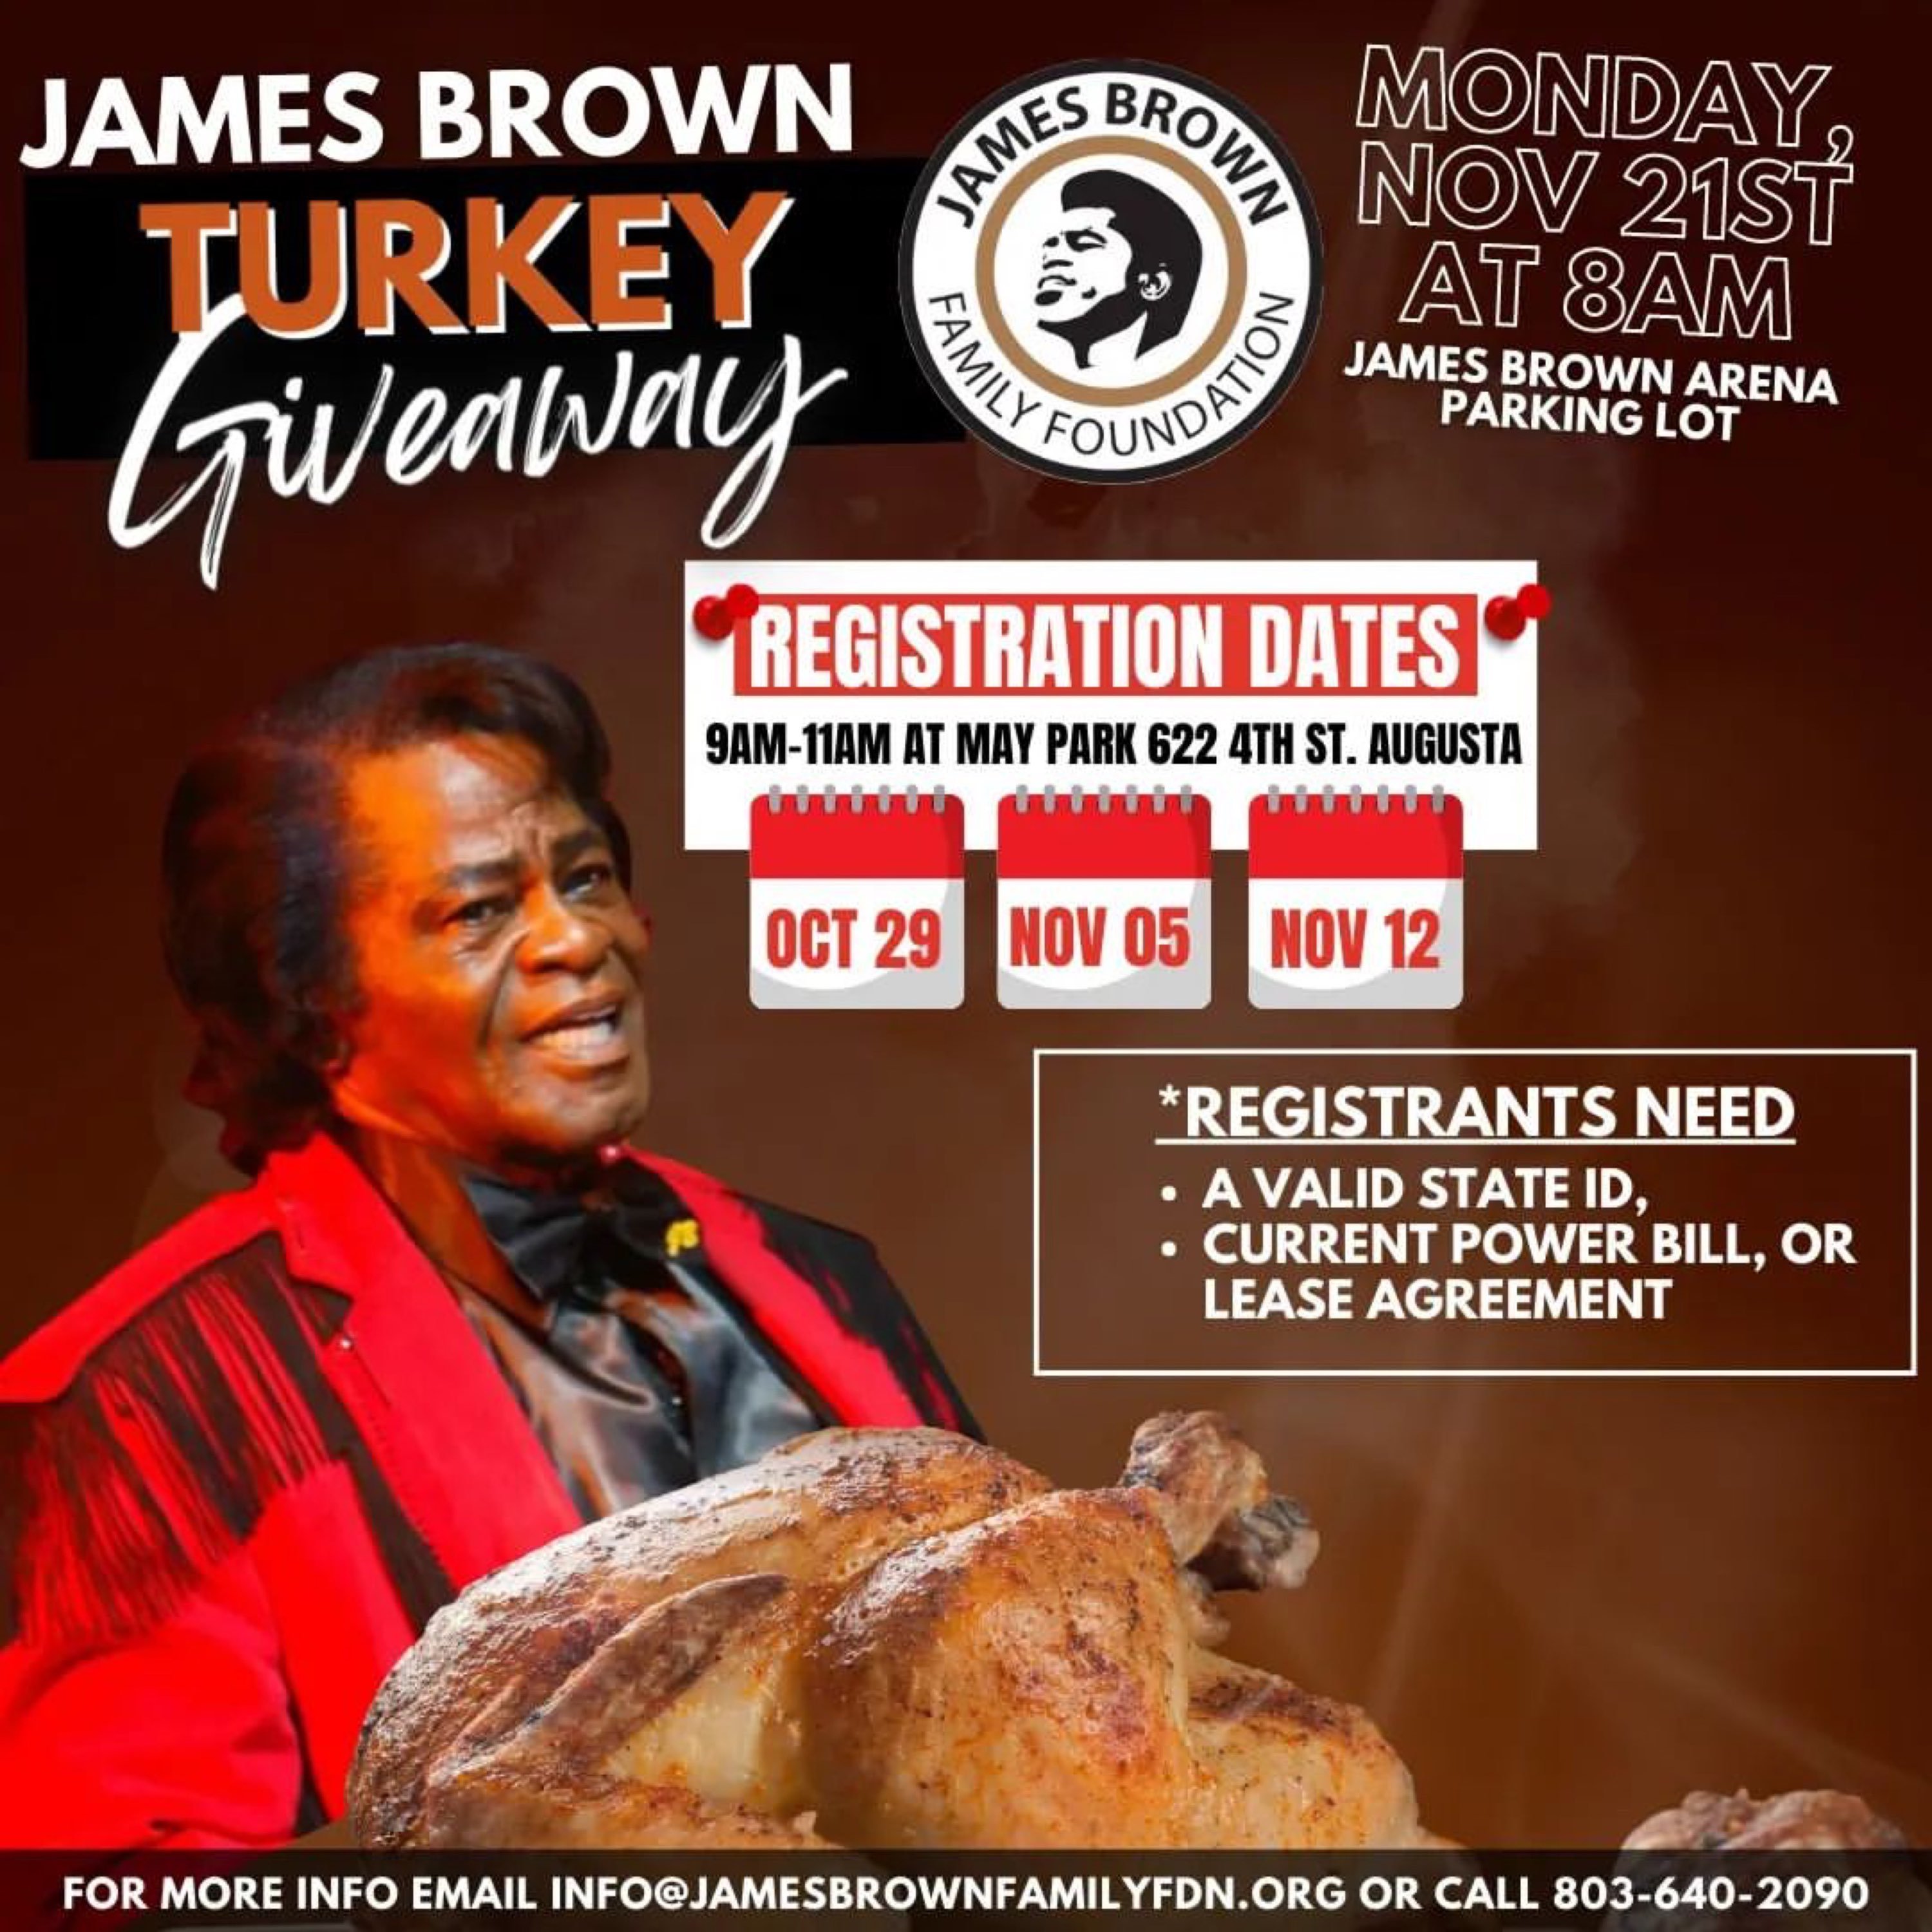 2022 James Brown Turkey Giveaway dates announced